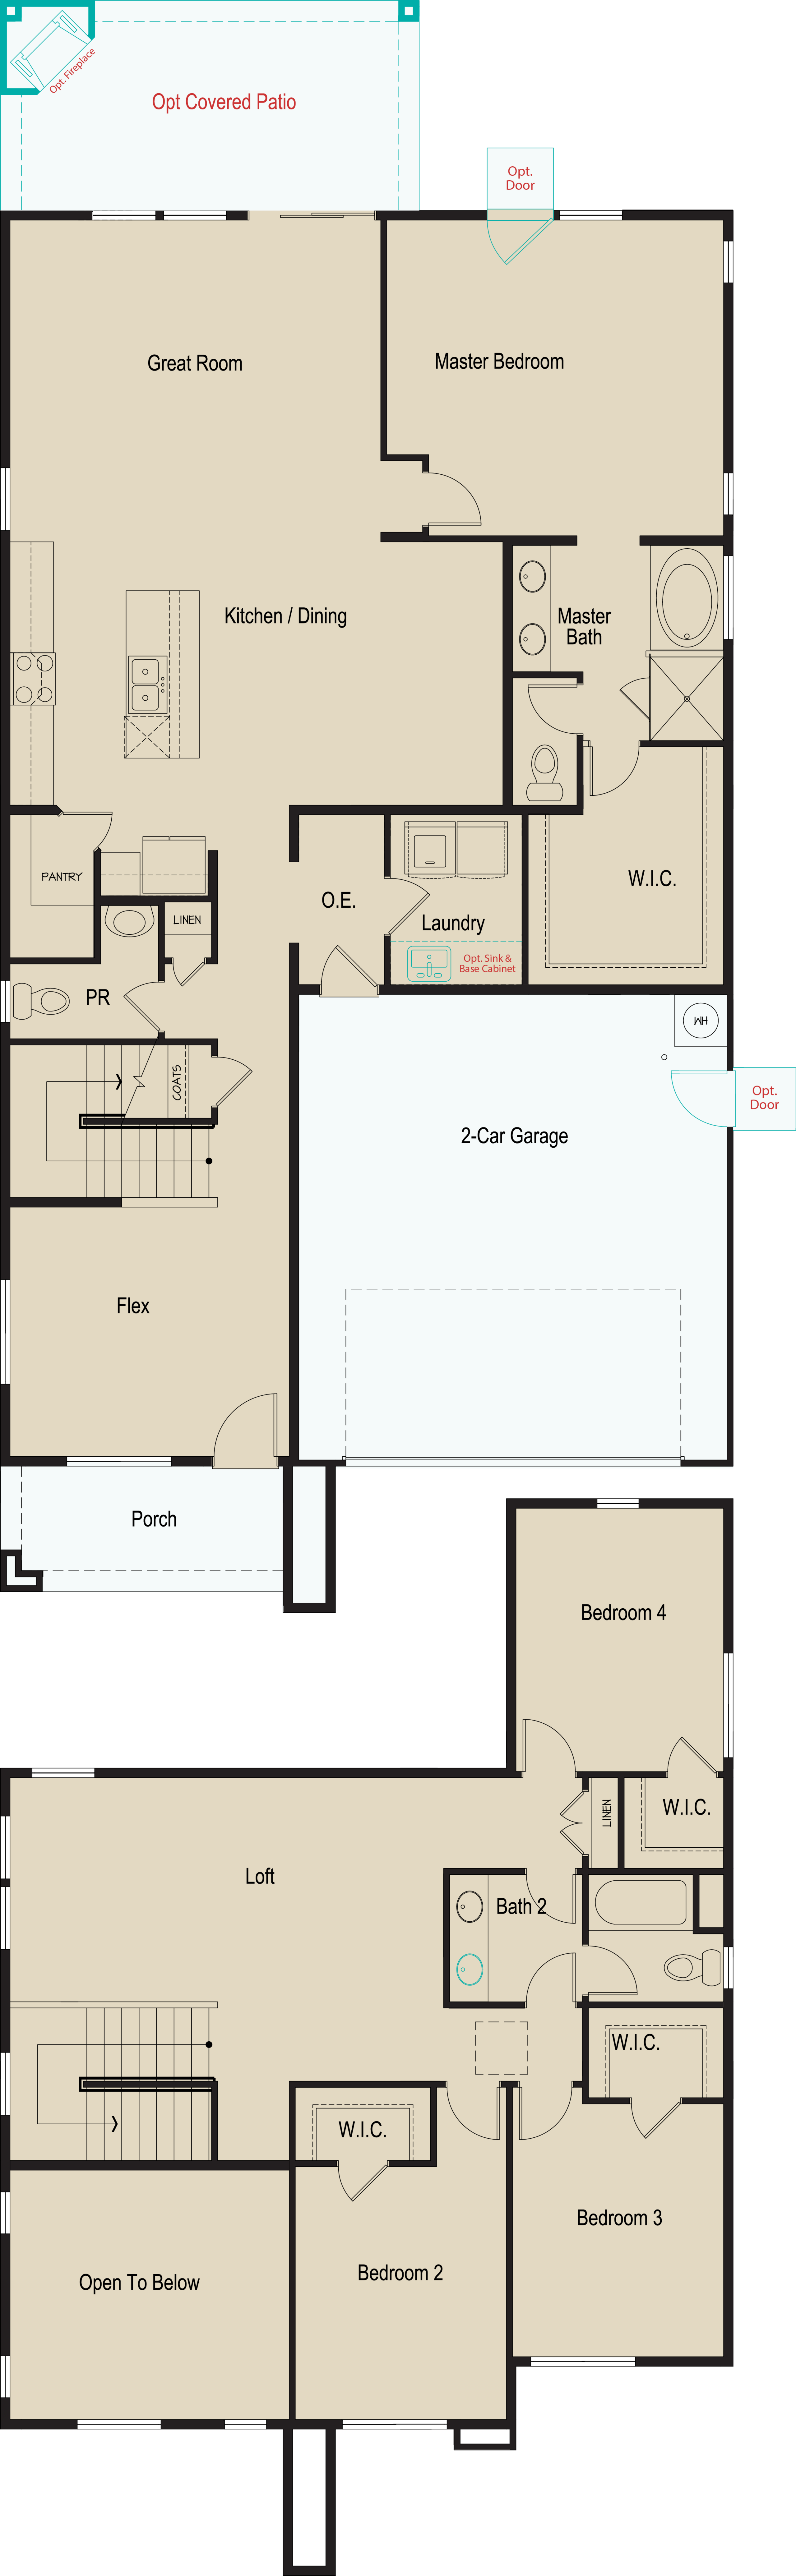 The-Ascent-Homesite-79-Plan-7-2594-SF